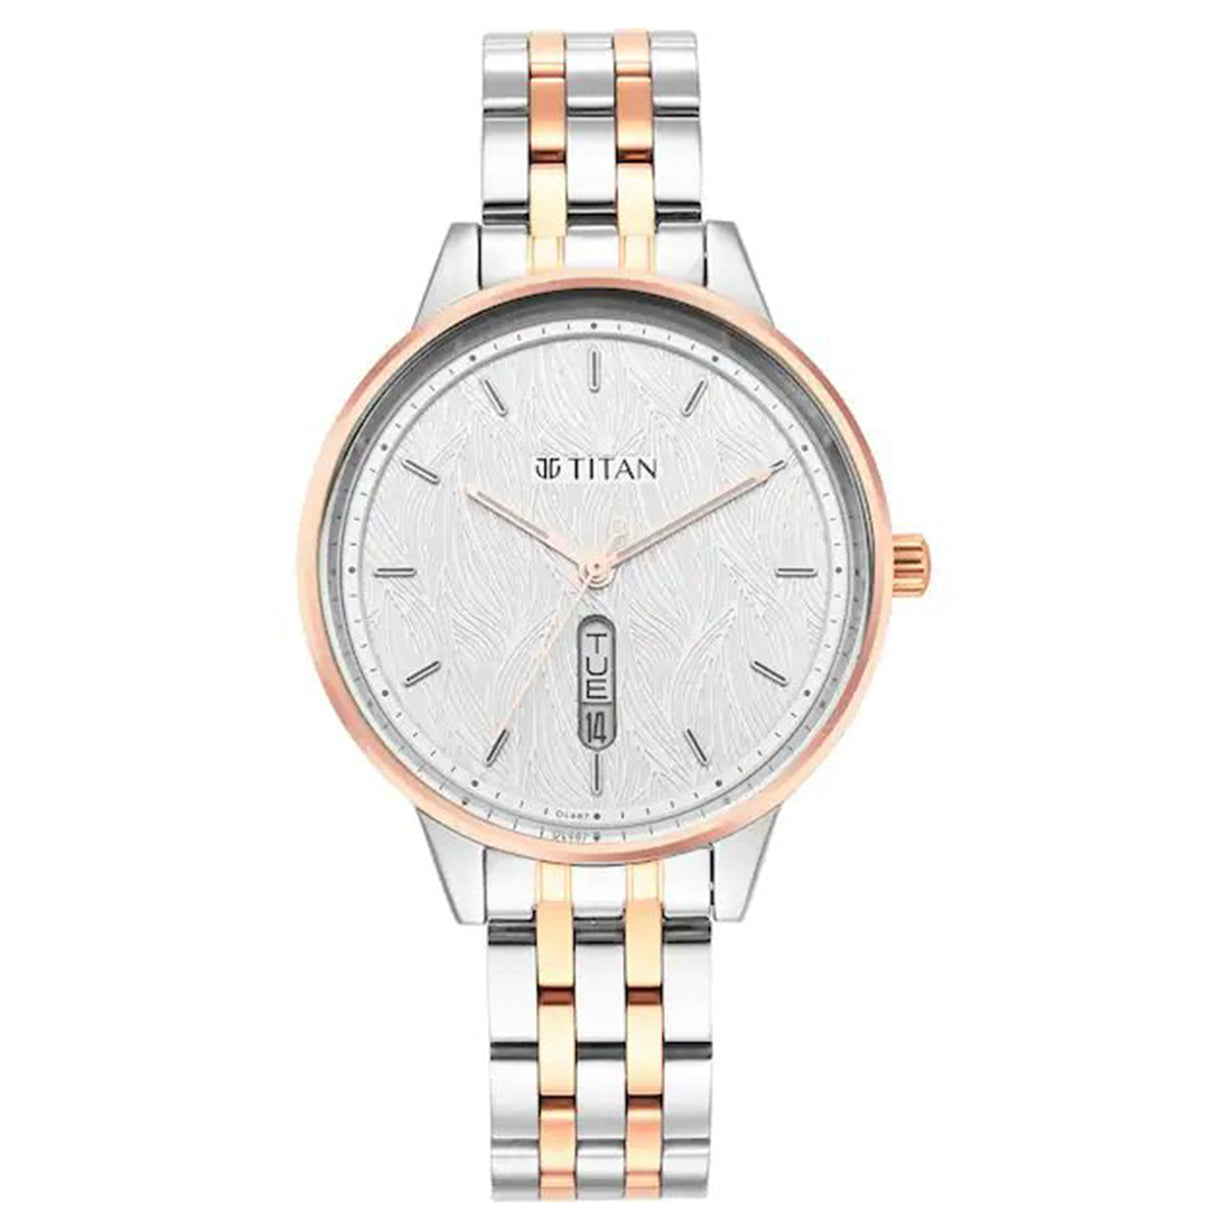 Workwear Watch with Grey Dial & Grey Leather Strap - Titan Corporate Gifting